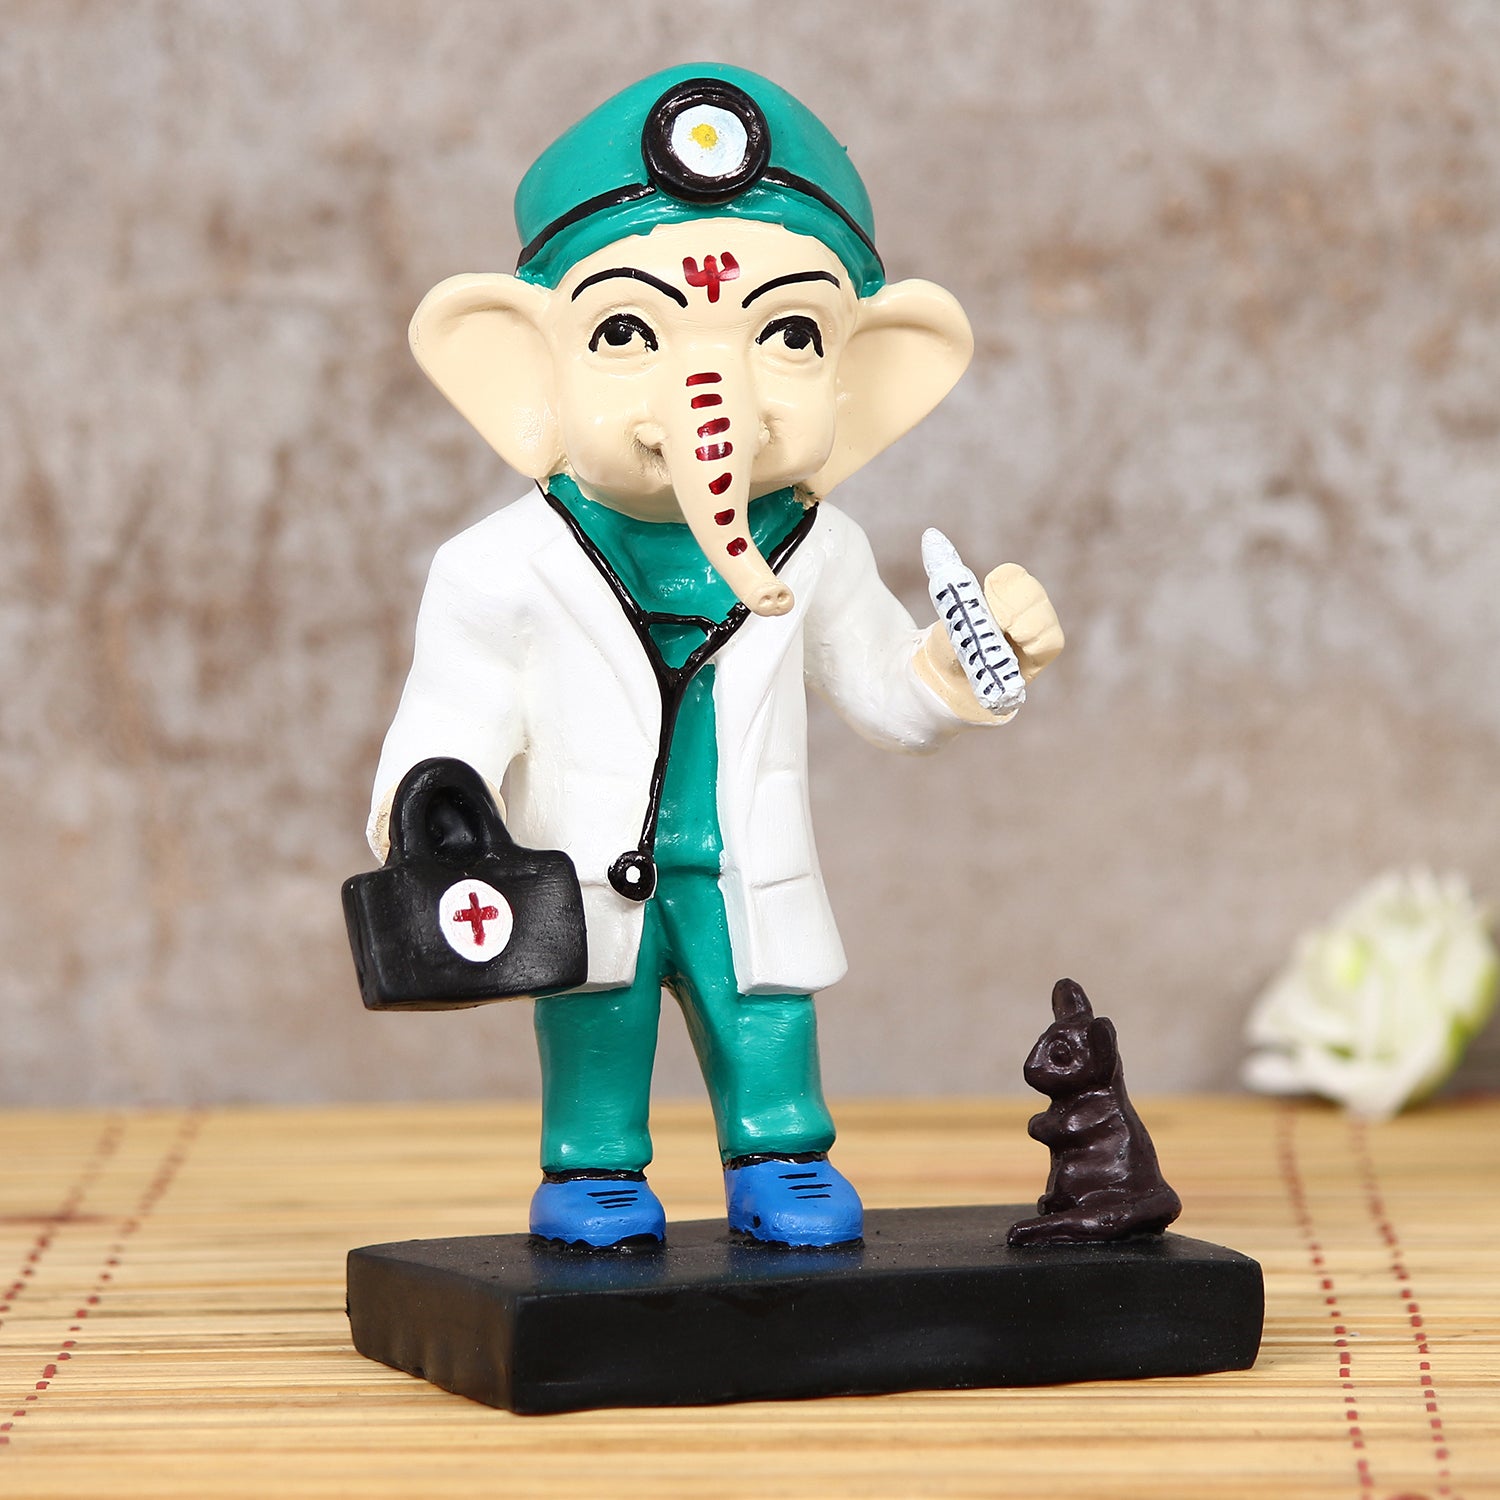 Polyresin Decorative Lord Ganesha Idol in Doctor Avatar (Green, White, Black and Blue)